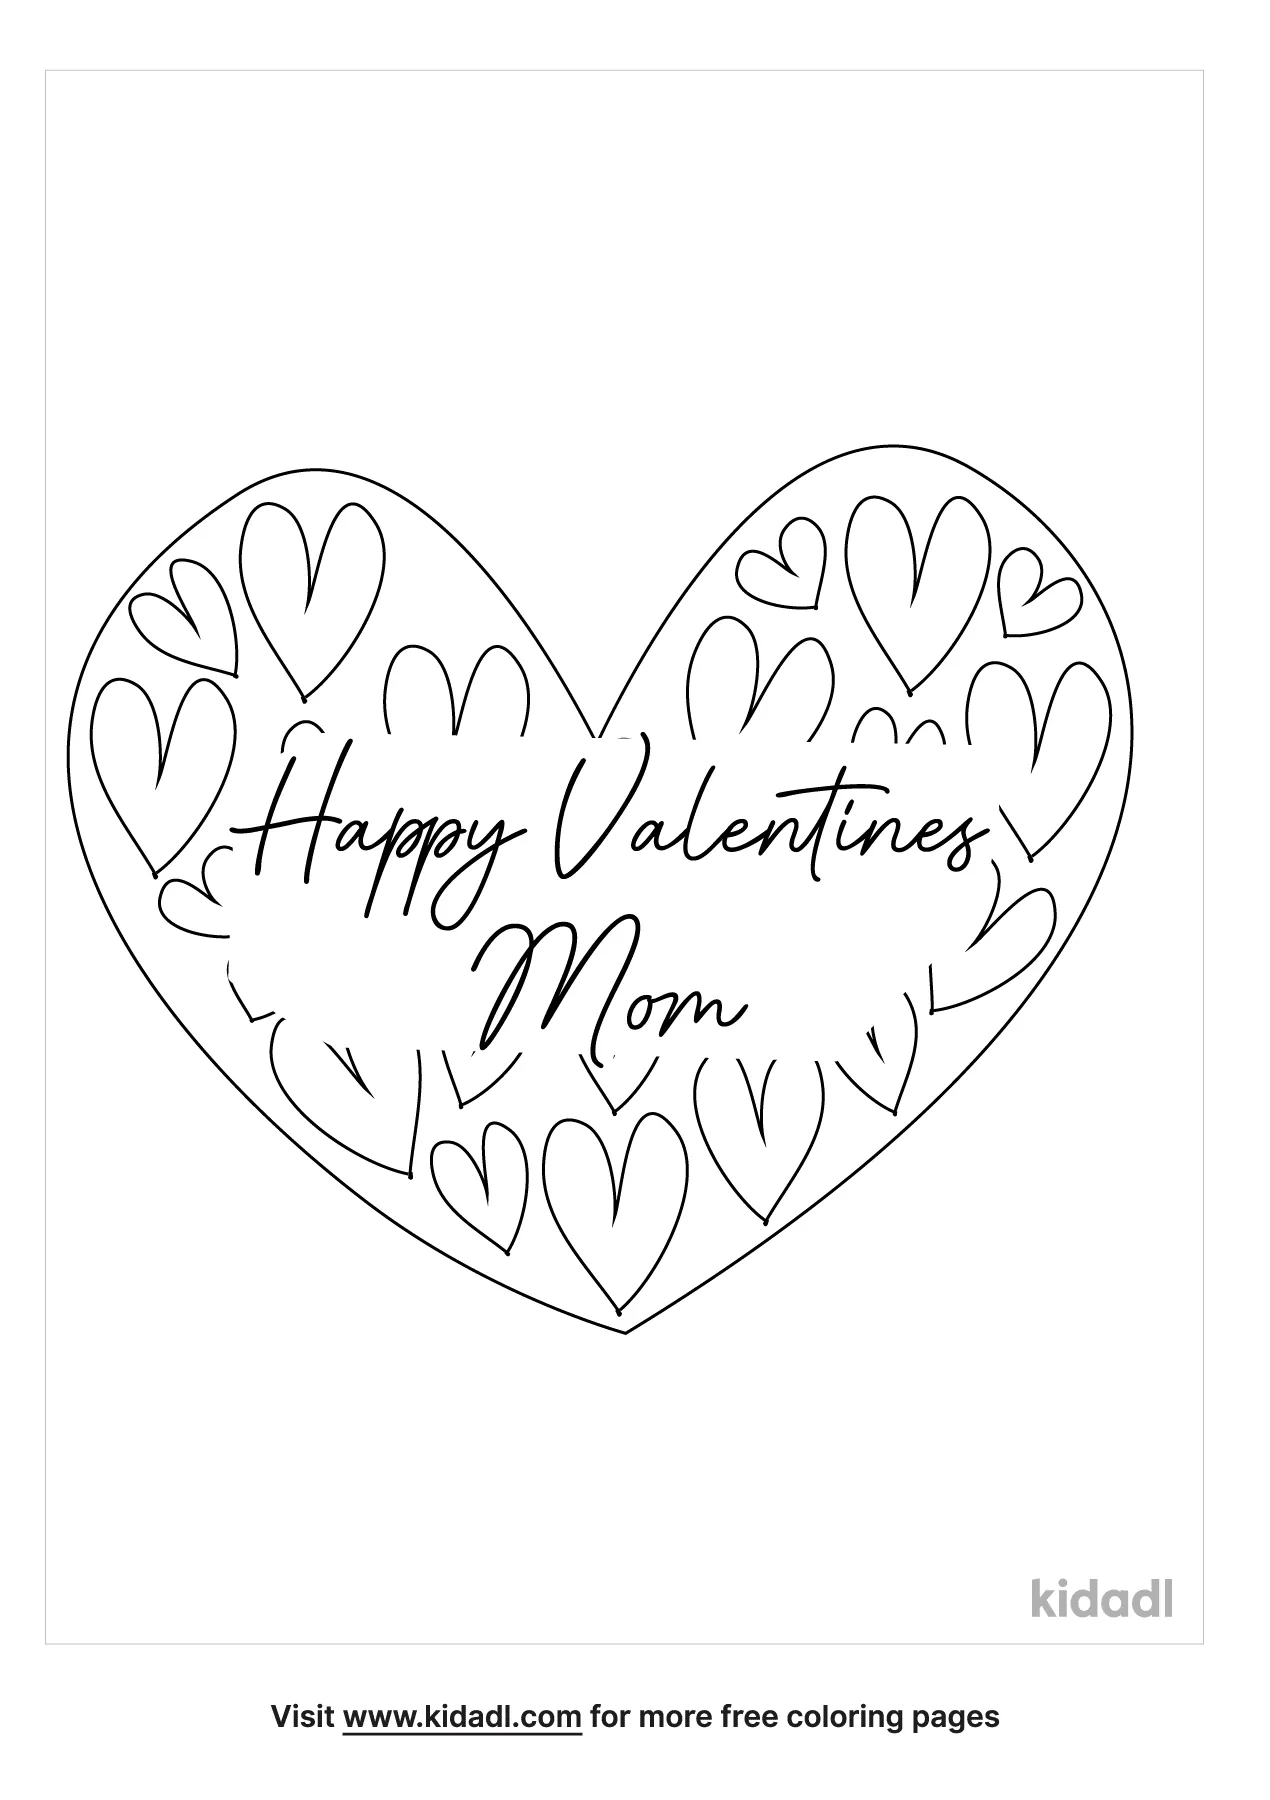 Valentines To Mom Coloring Page